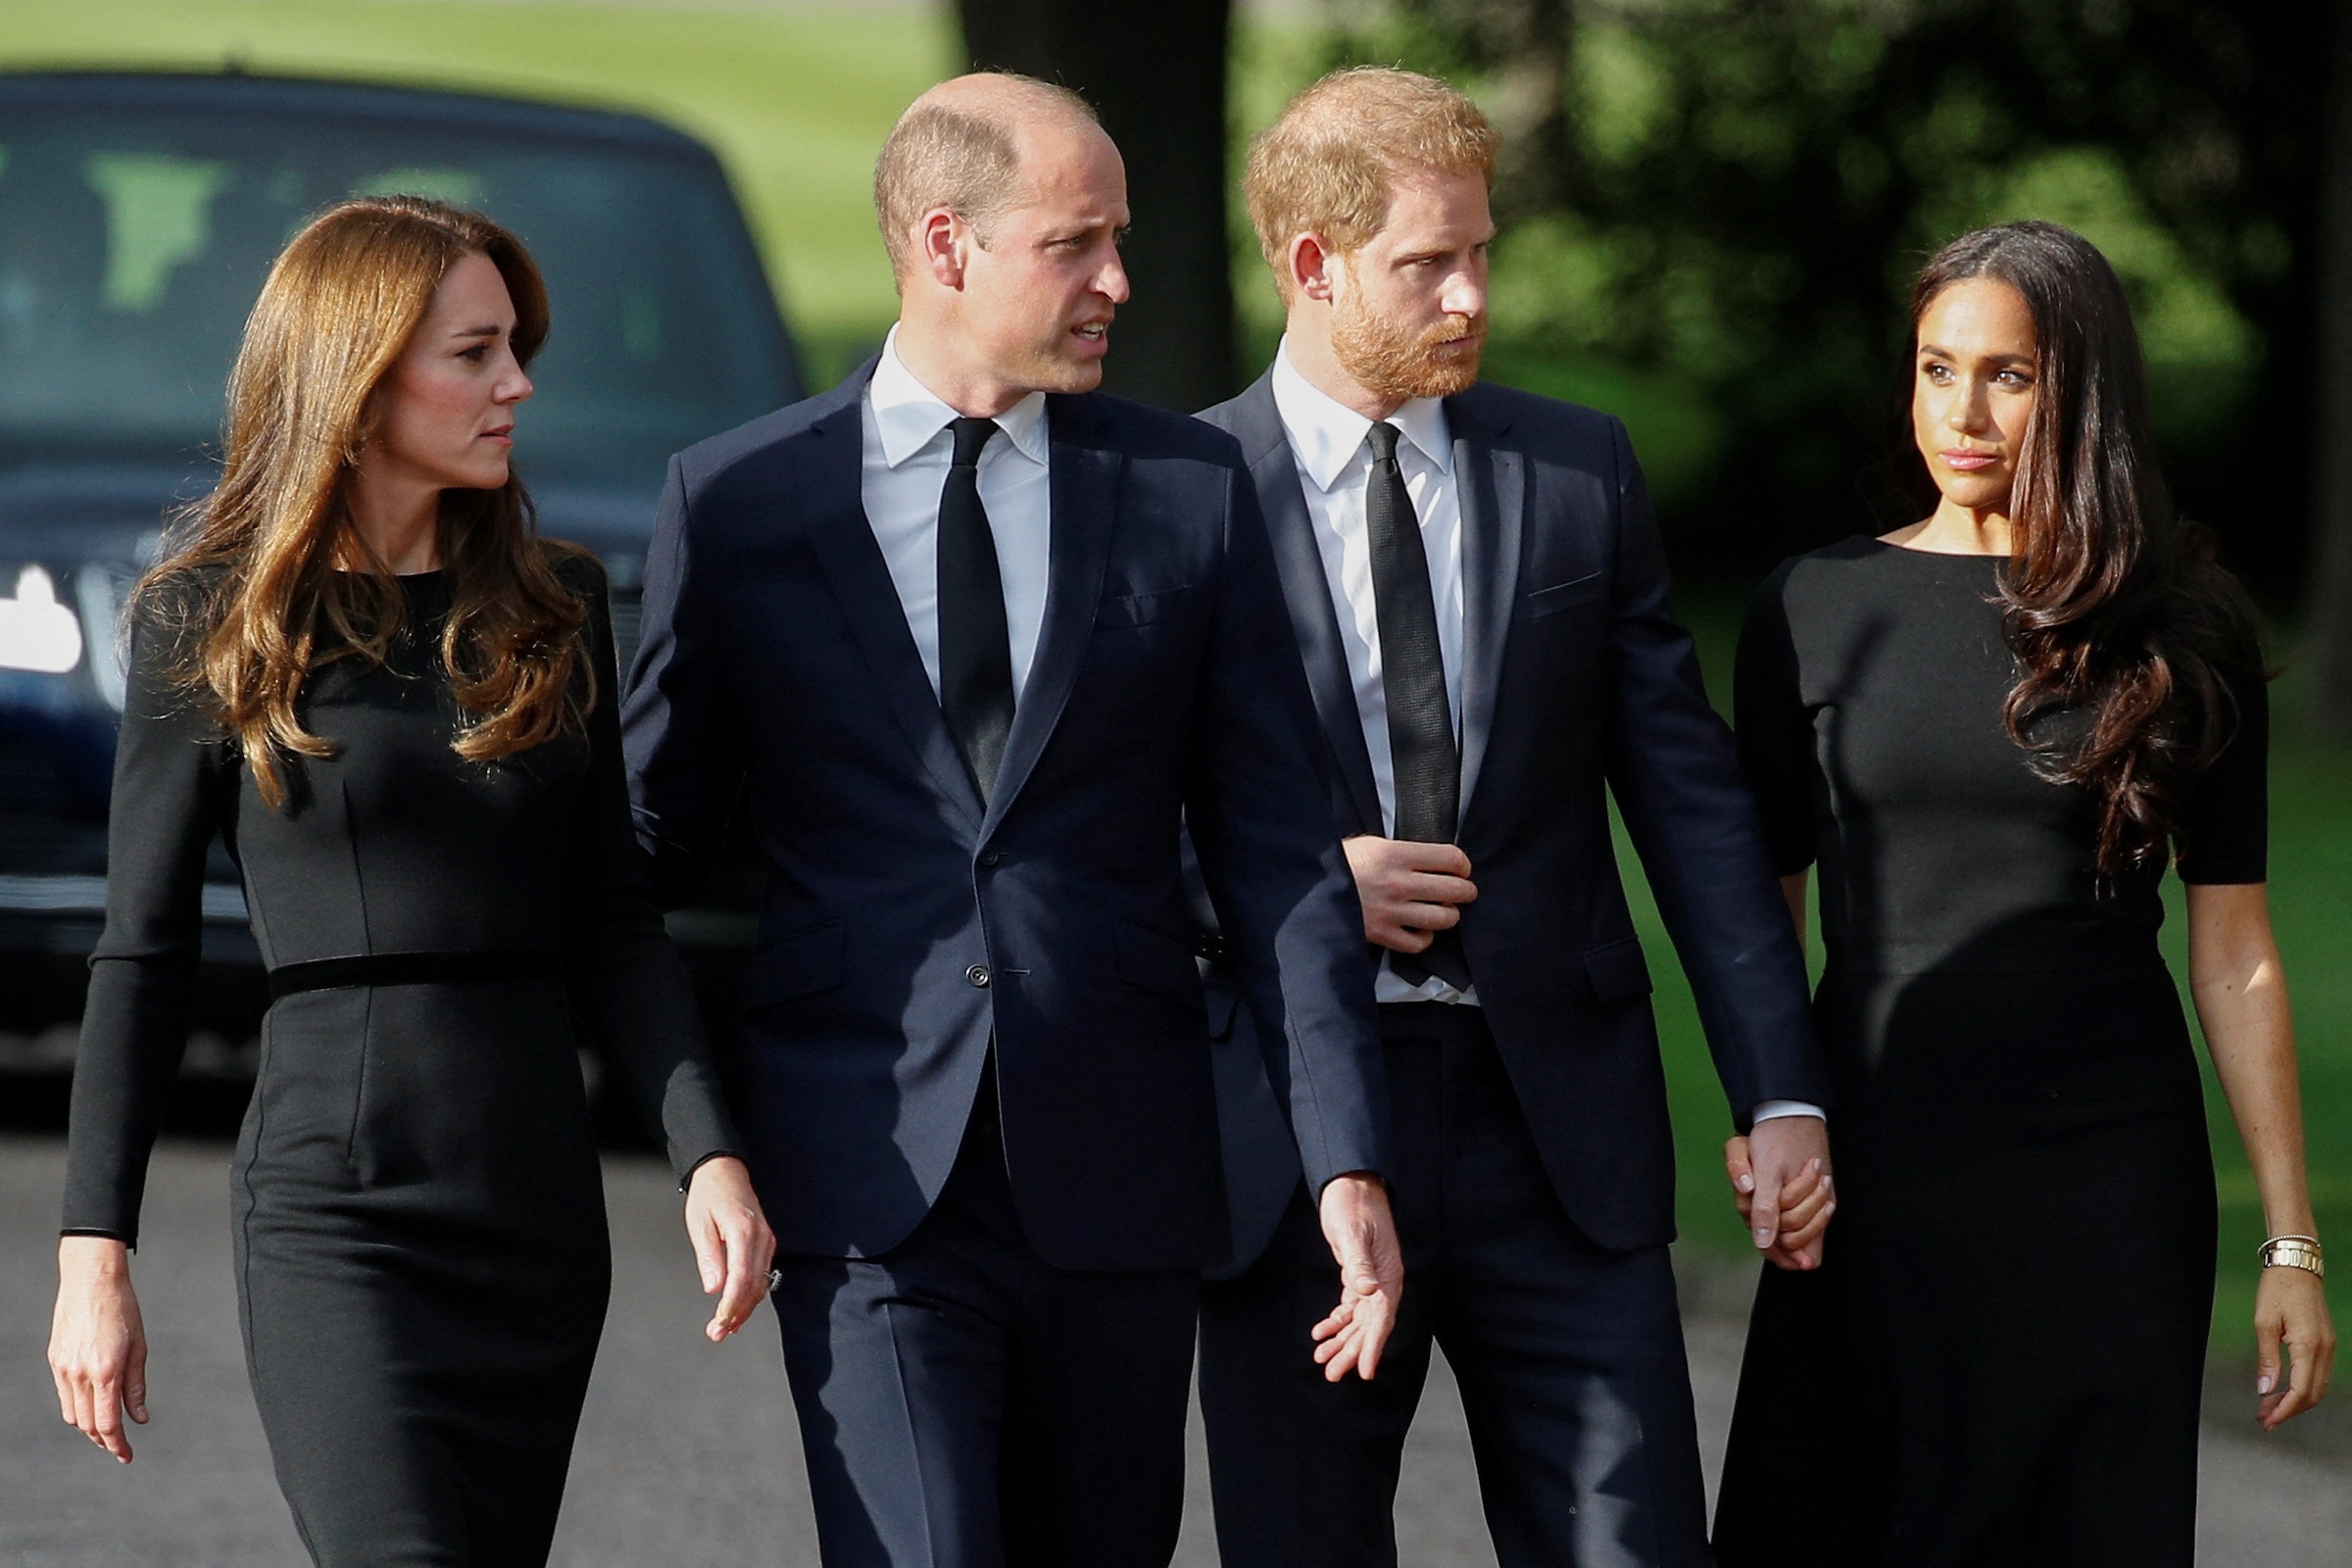 Unravel the royal rumor mill: did Prince William and Kate Middleton secretly divorce? Sounds like a juicy Agatha Christie mystery. Decipher the whispers with us.